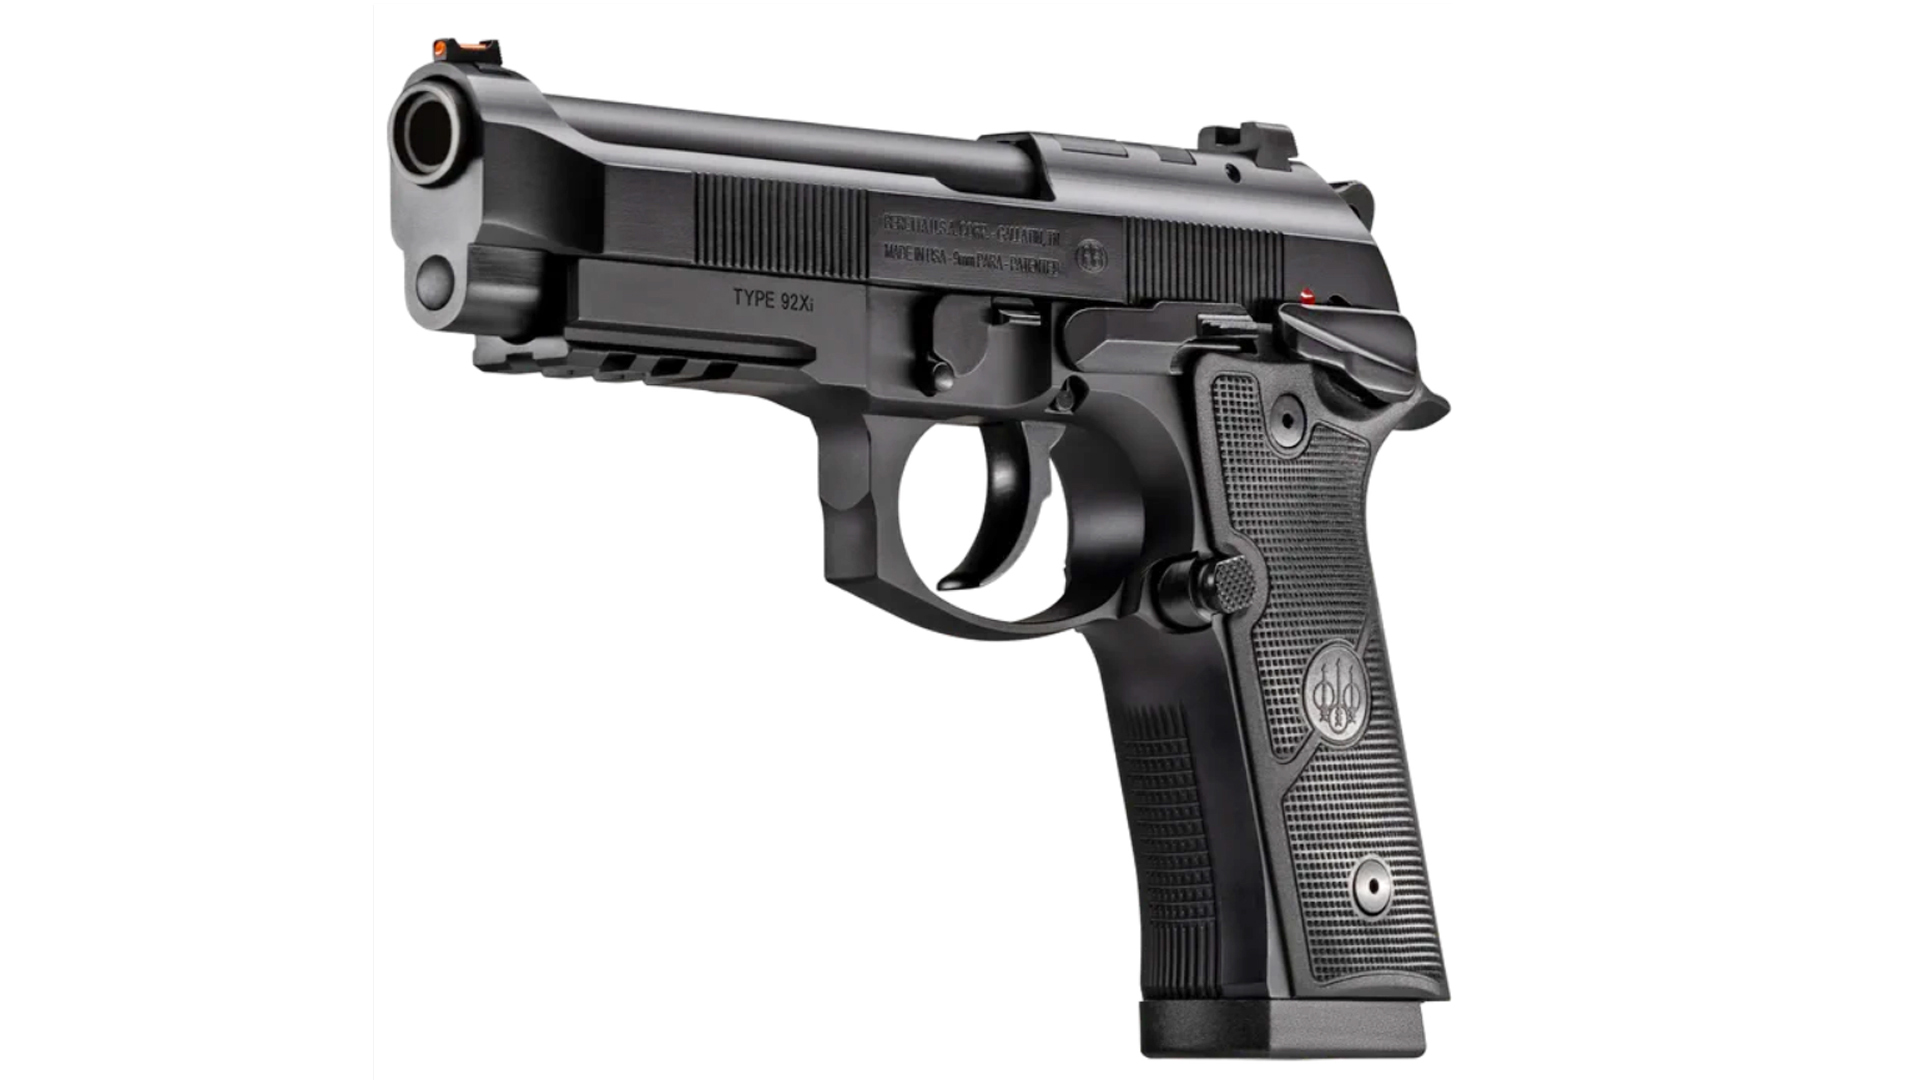 Left-front shot of the Beretta 92GTS, showing the muzzle and left-side controls on a white background.